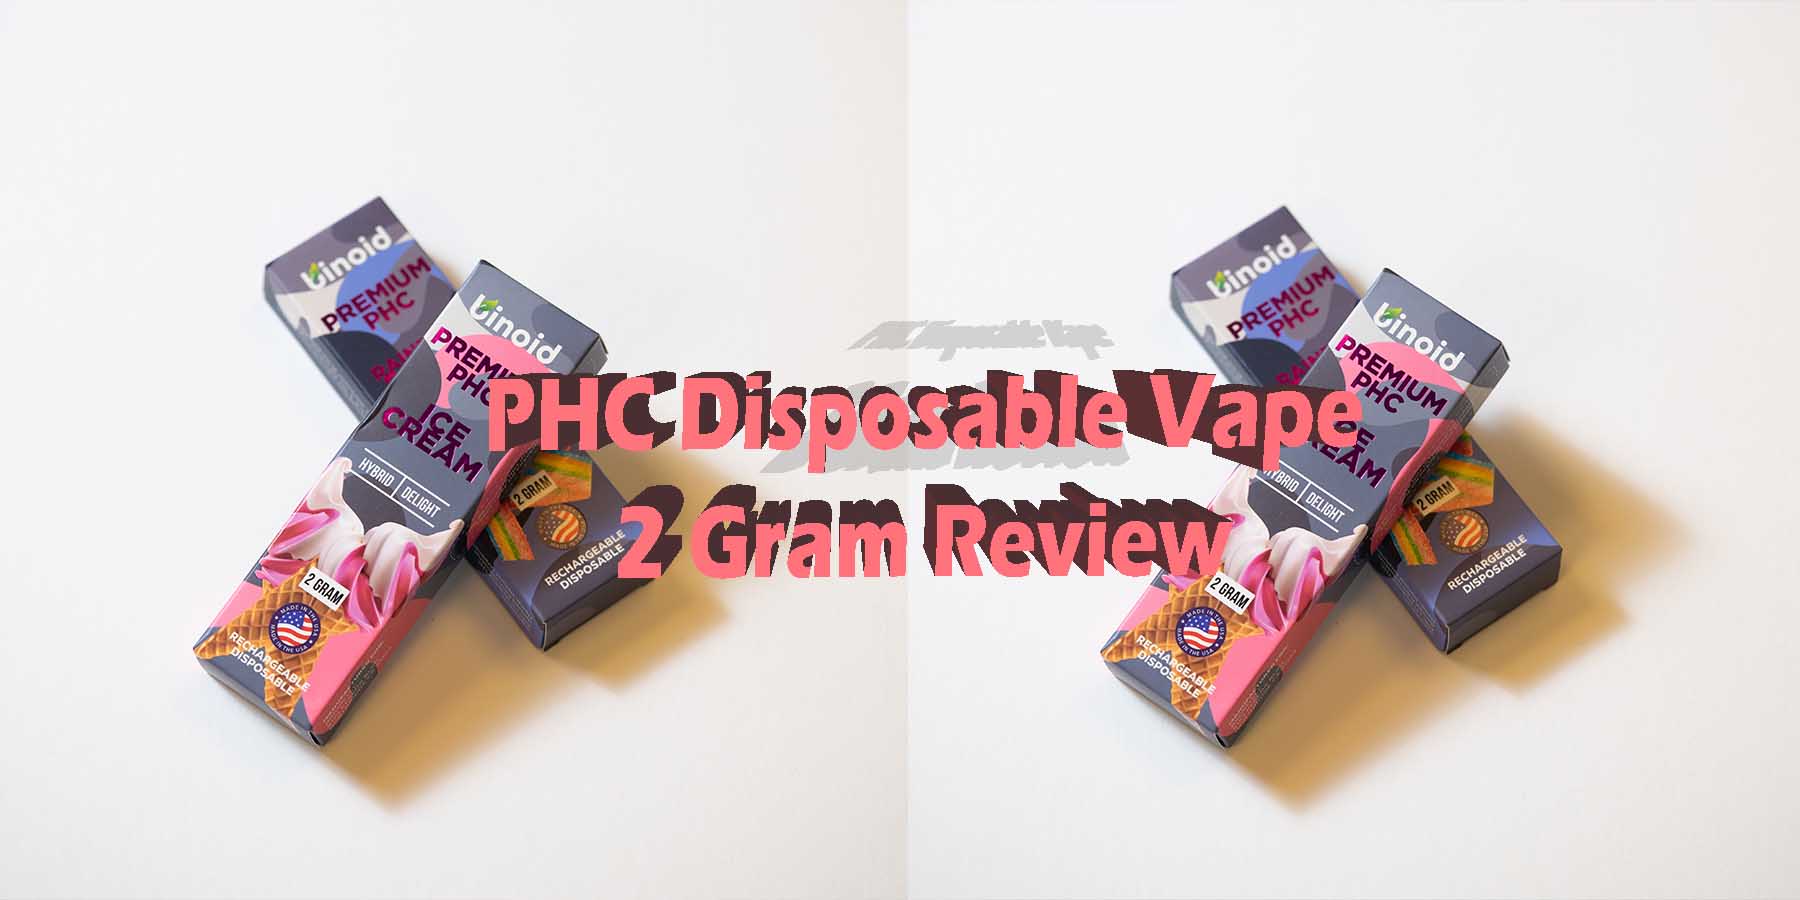 PHC Disposable Vape 2 Gram Review Gram Review Take Work Online Best Brand Price Get Near Me Lowest Coupon Discount Store Shop Vapes Carts Online Strongest Binoid